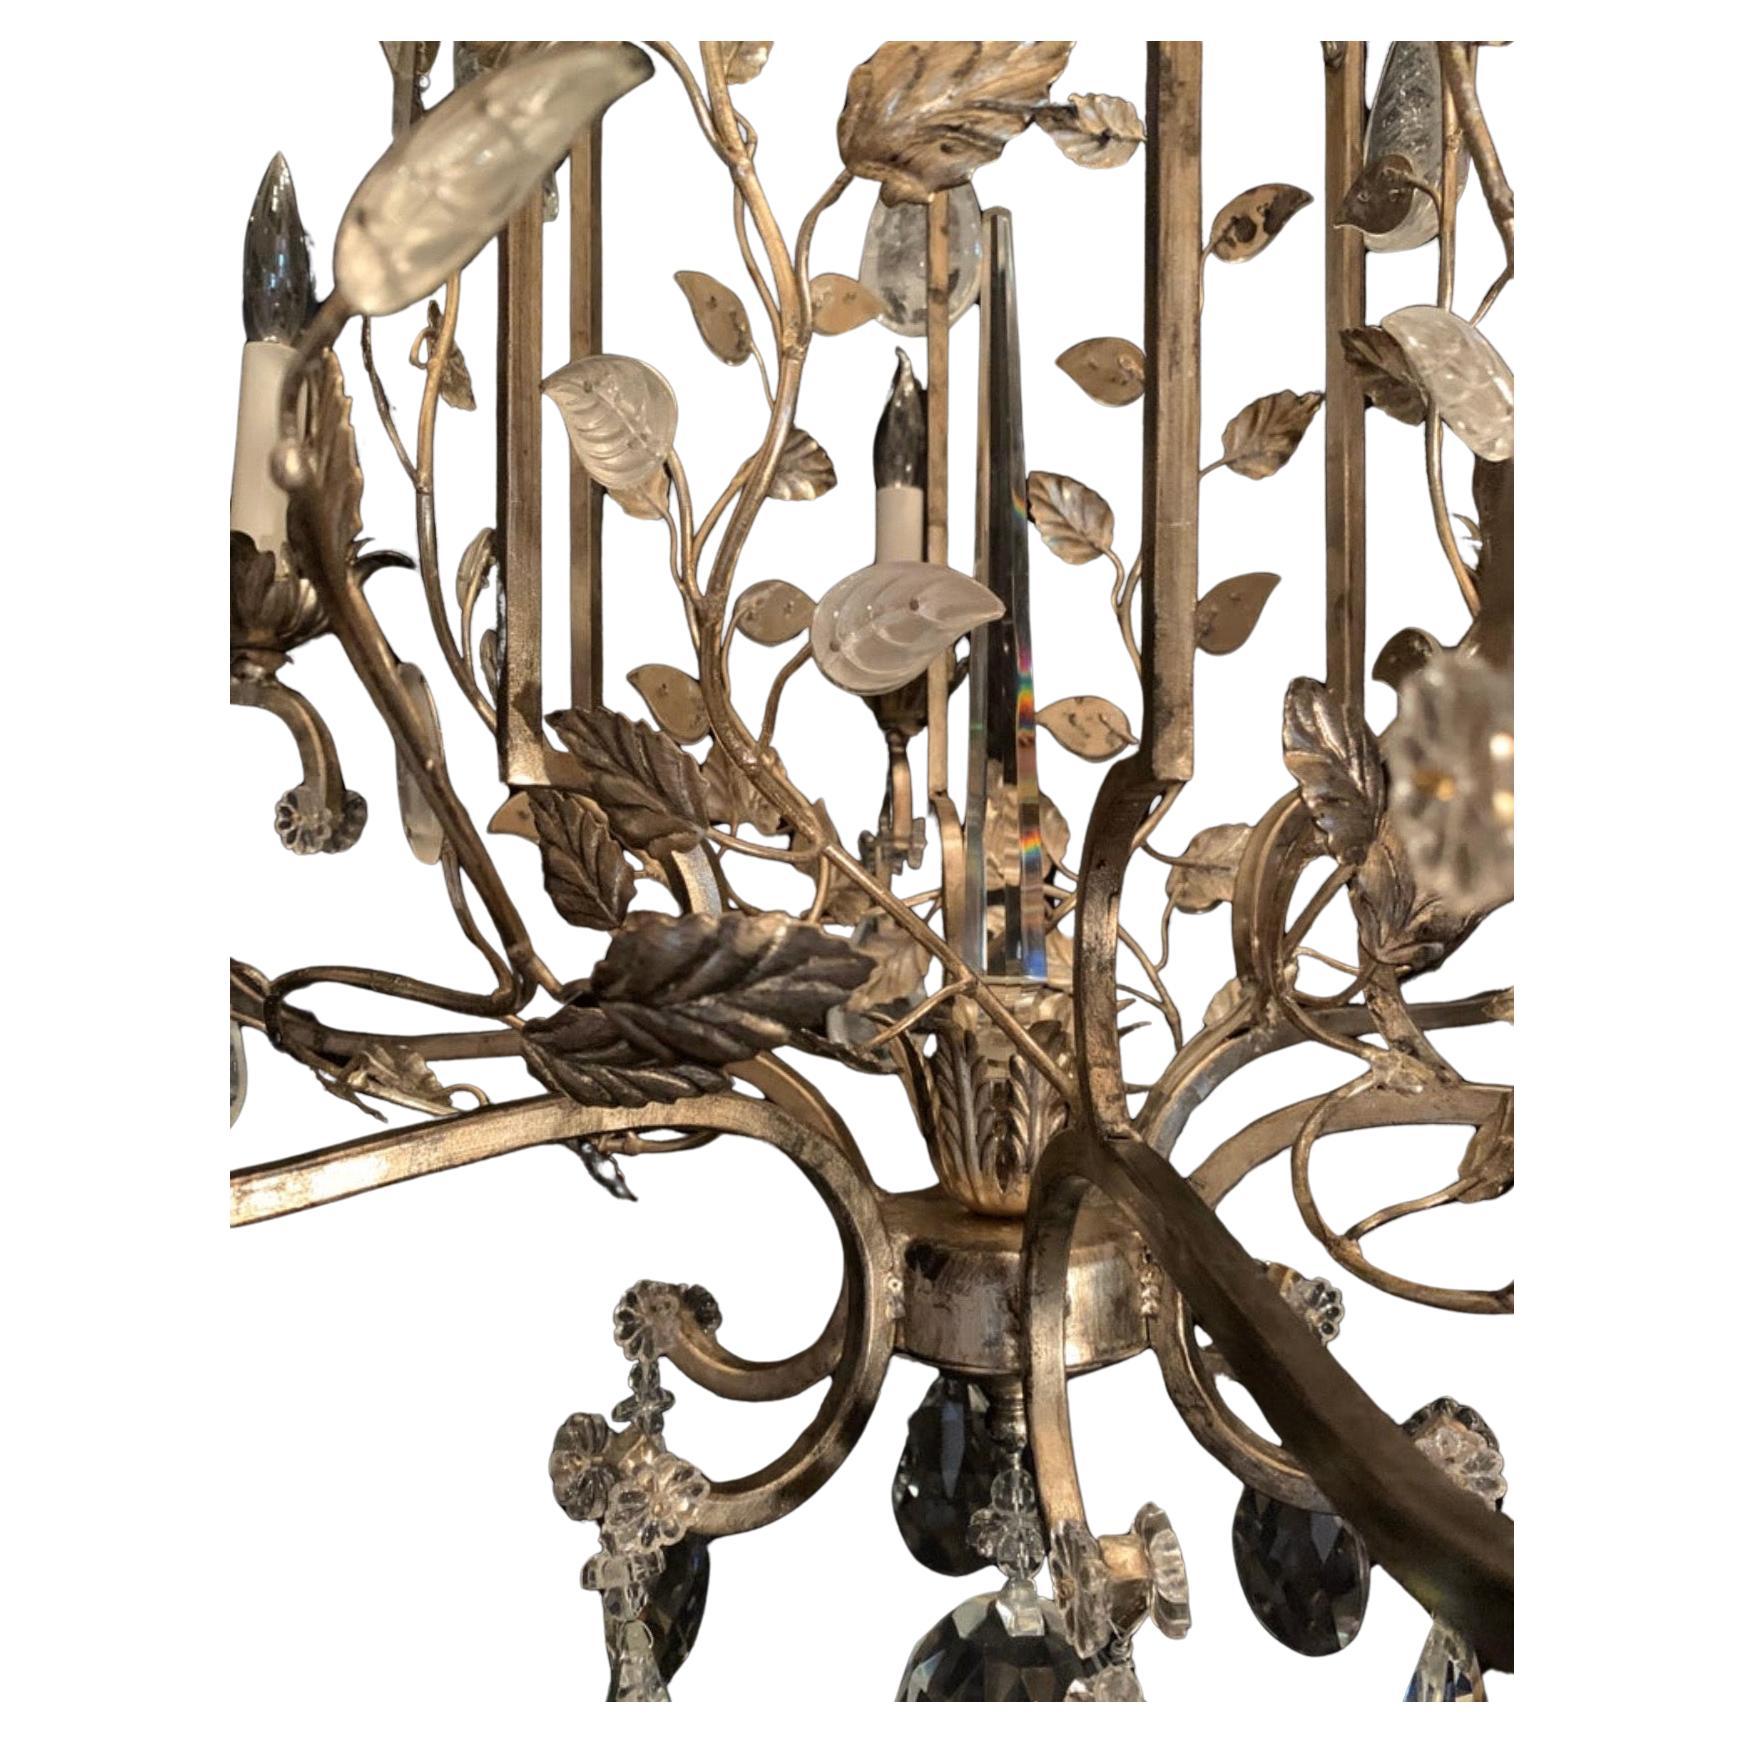 A wonderful silver gilt Baguès style French Louis XVI faux rock crystal leaf and flower 6 candelabra light chandelier, rewired and ready to install with chain canopy and all mounting hardware.